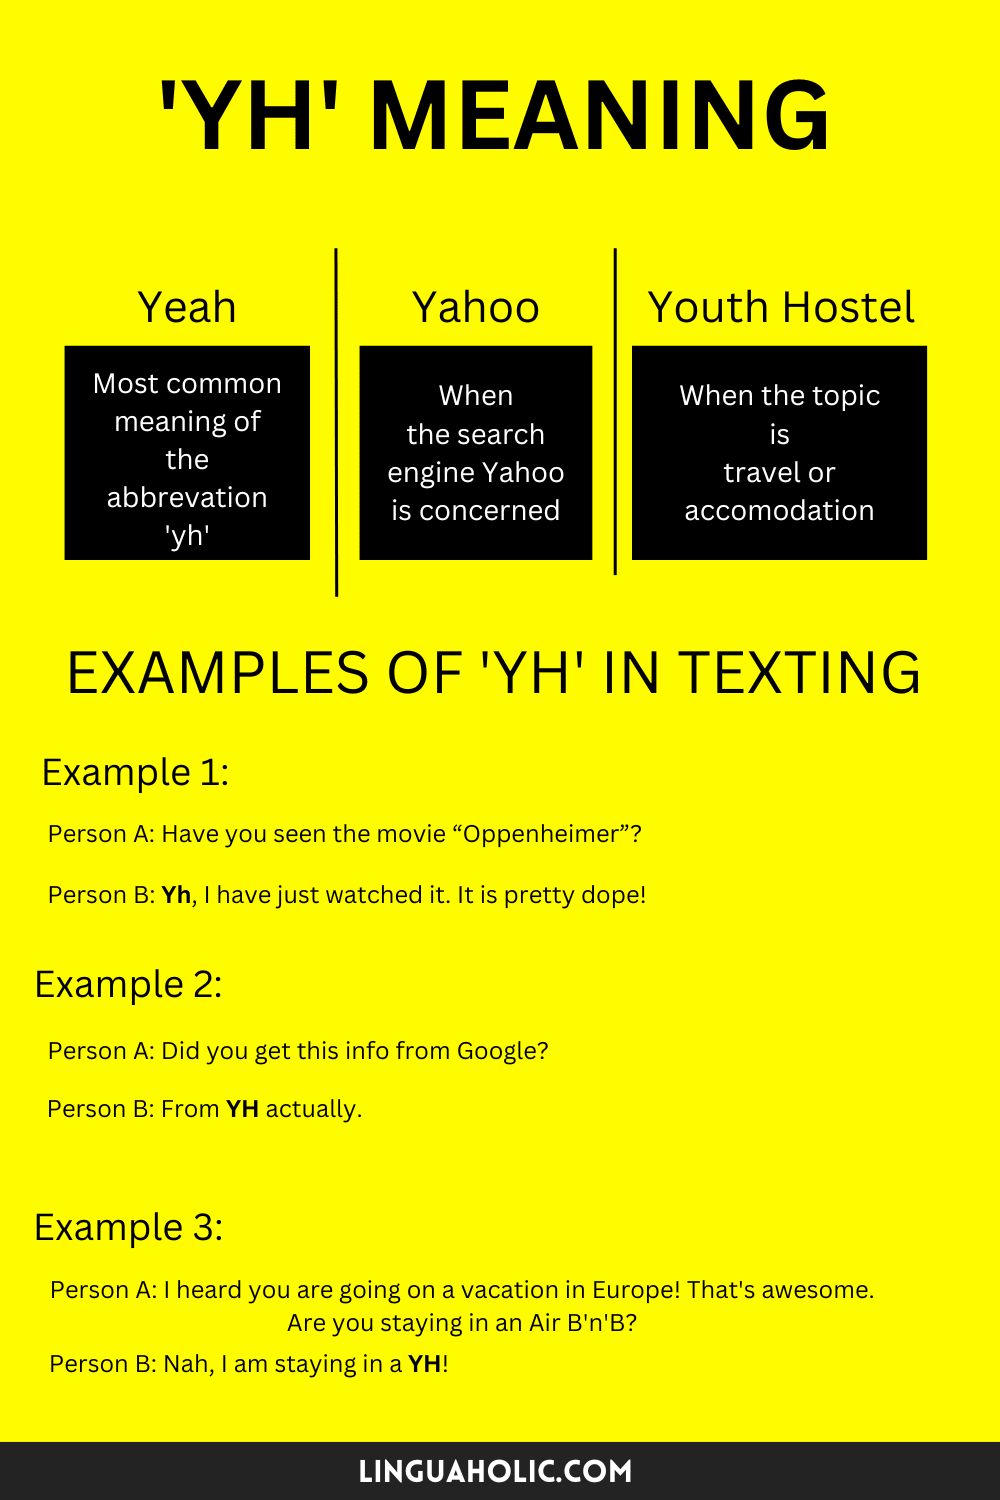 YH Meaning Infographic